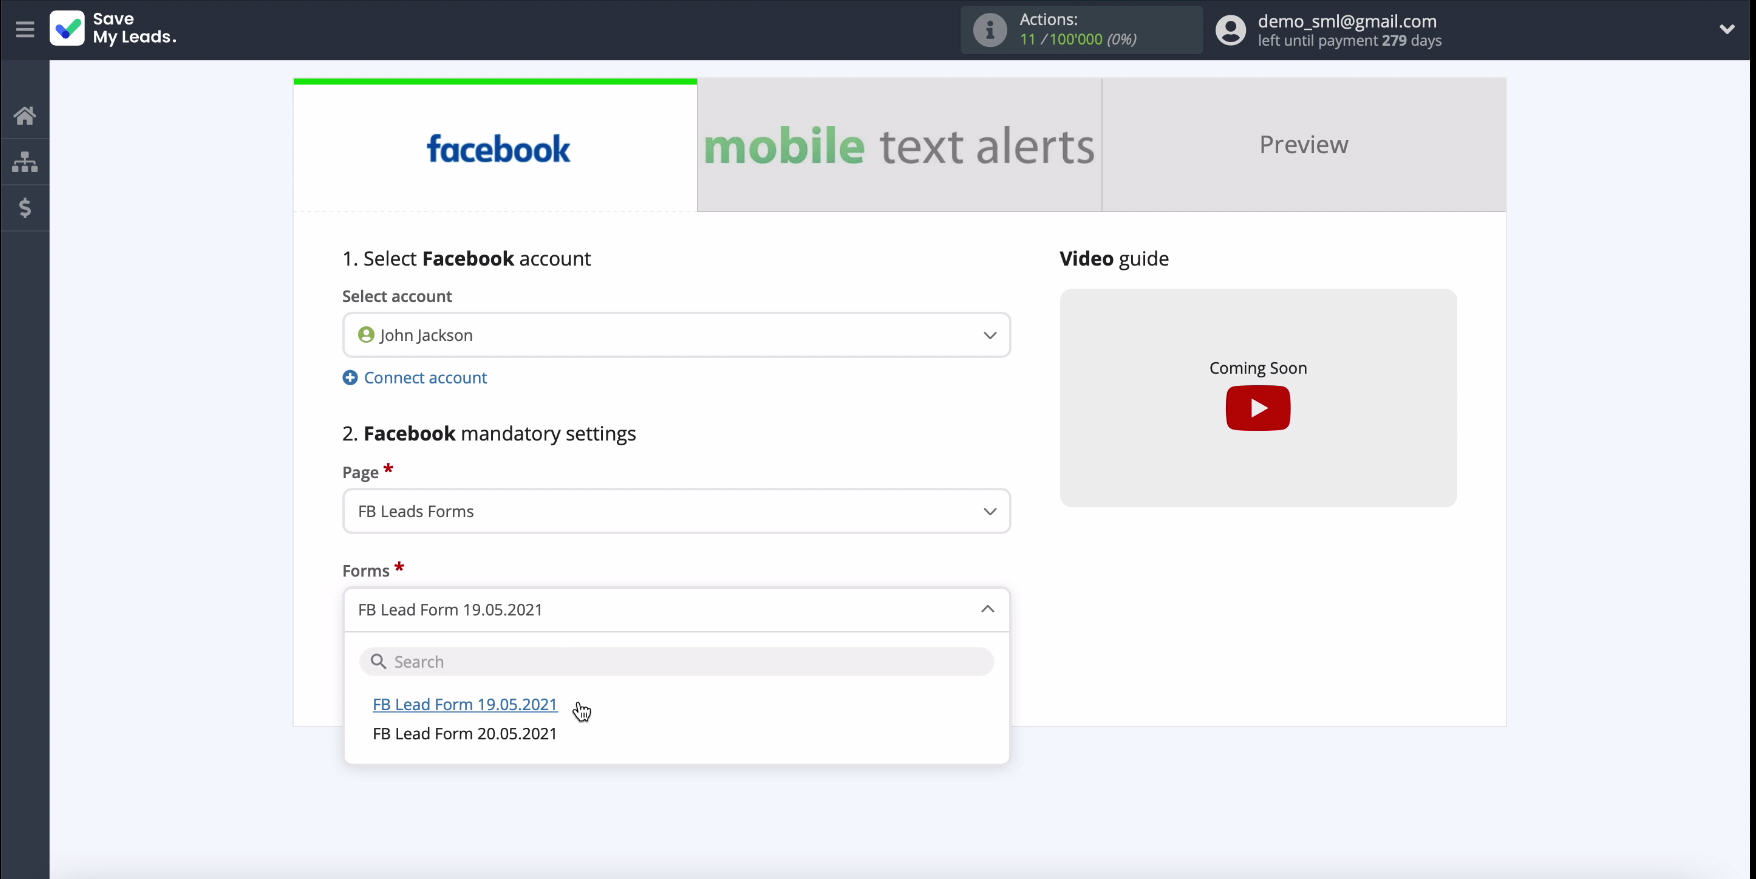 Facebook and Mobile Text Alerts integration | Specify the forms